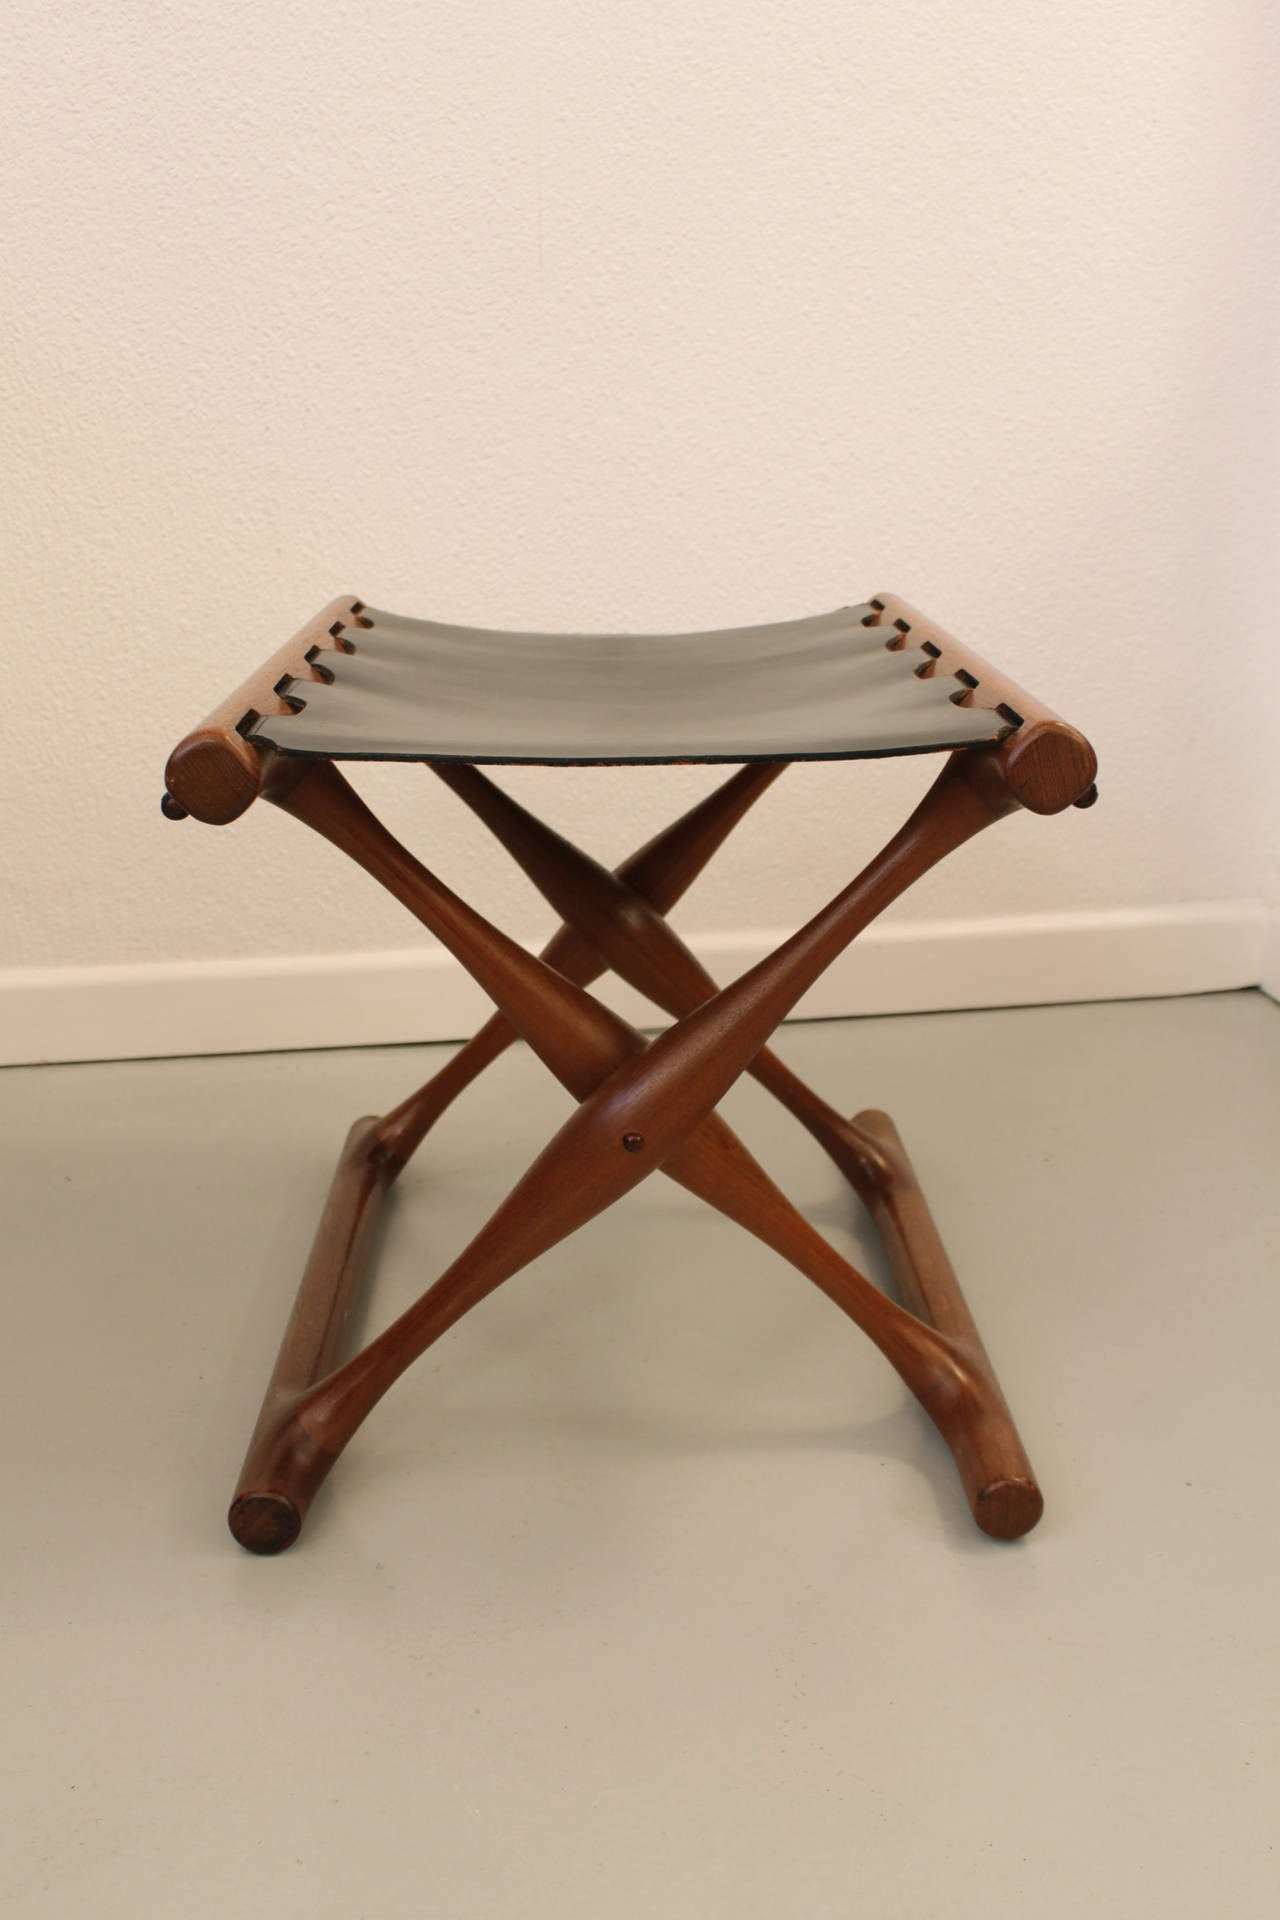 Guldhoj teak and leather folding stool by Poul Hundevad
Solid teak and black leather, very good condition
Original leather with labels
Denmark ca.1957